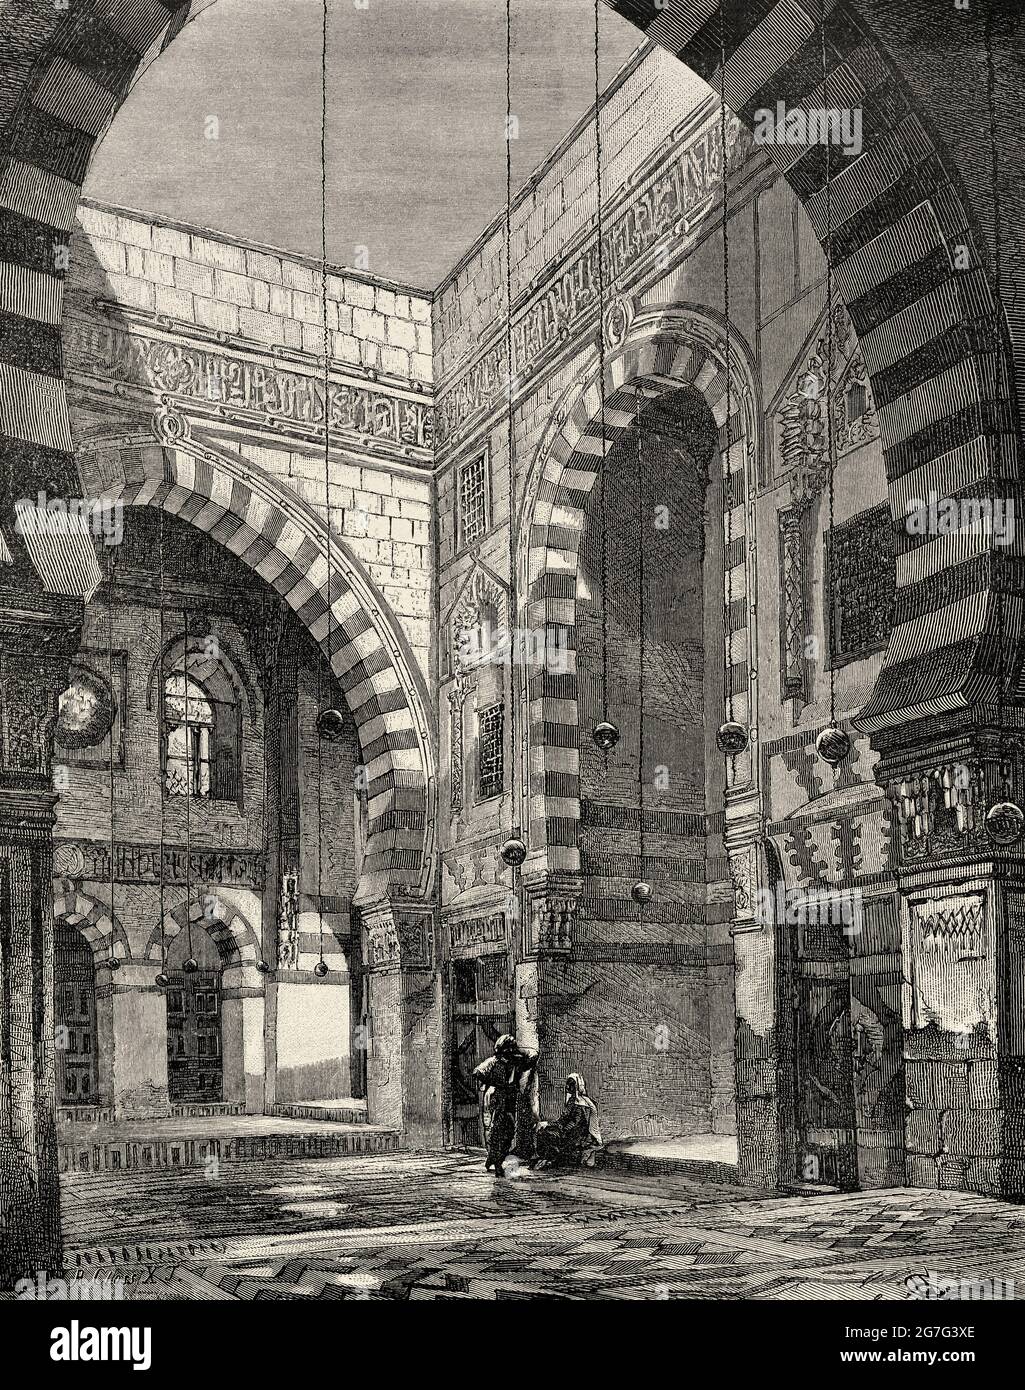 Qait-Bey Muhamadi Mosque or Burial Mosque of Qait Bey, built by the Mamluk Sultan Qaitbay in 1488, Cairo. Egypt, North Africa. Old 19th century engraved illustration from El Mundo Ilustrado 1880 Stock Photo